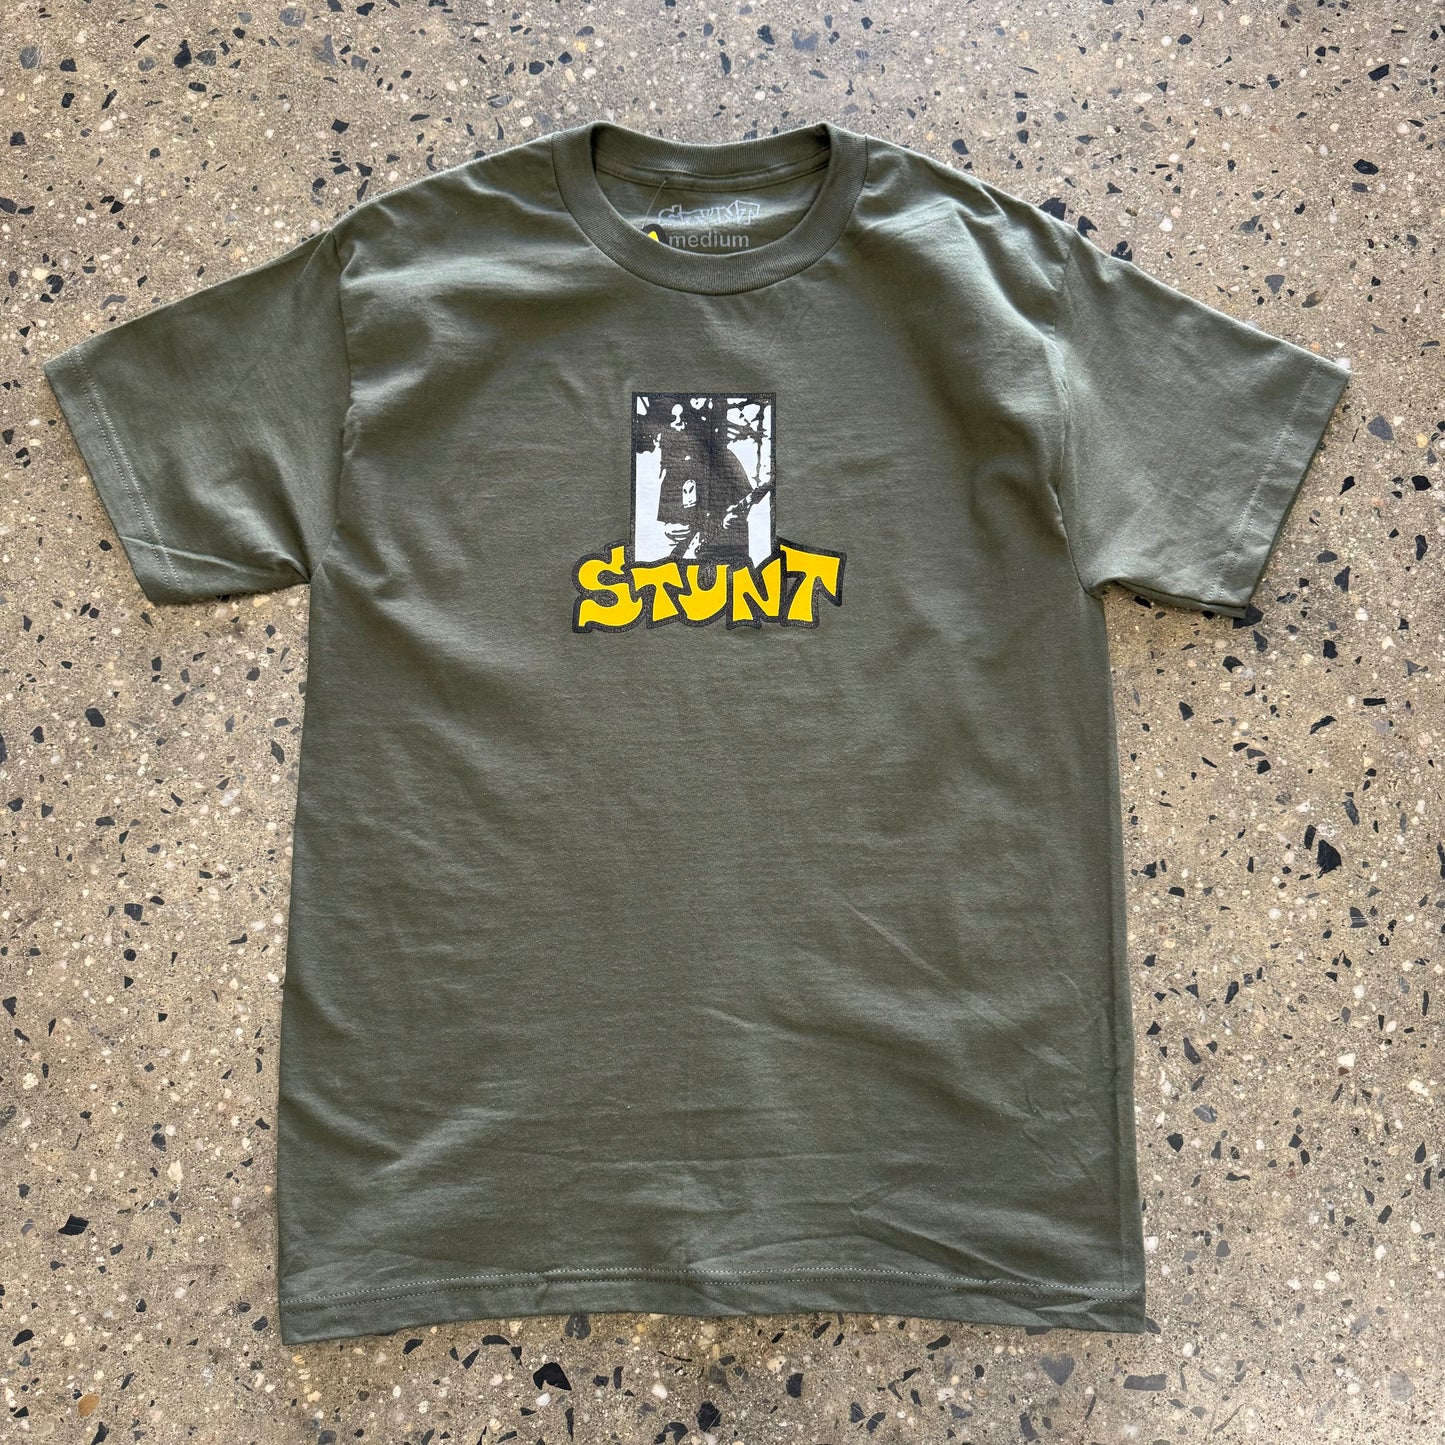 Black white and yellow guitar player logo on army green t-shirt